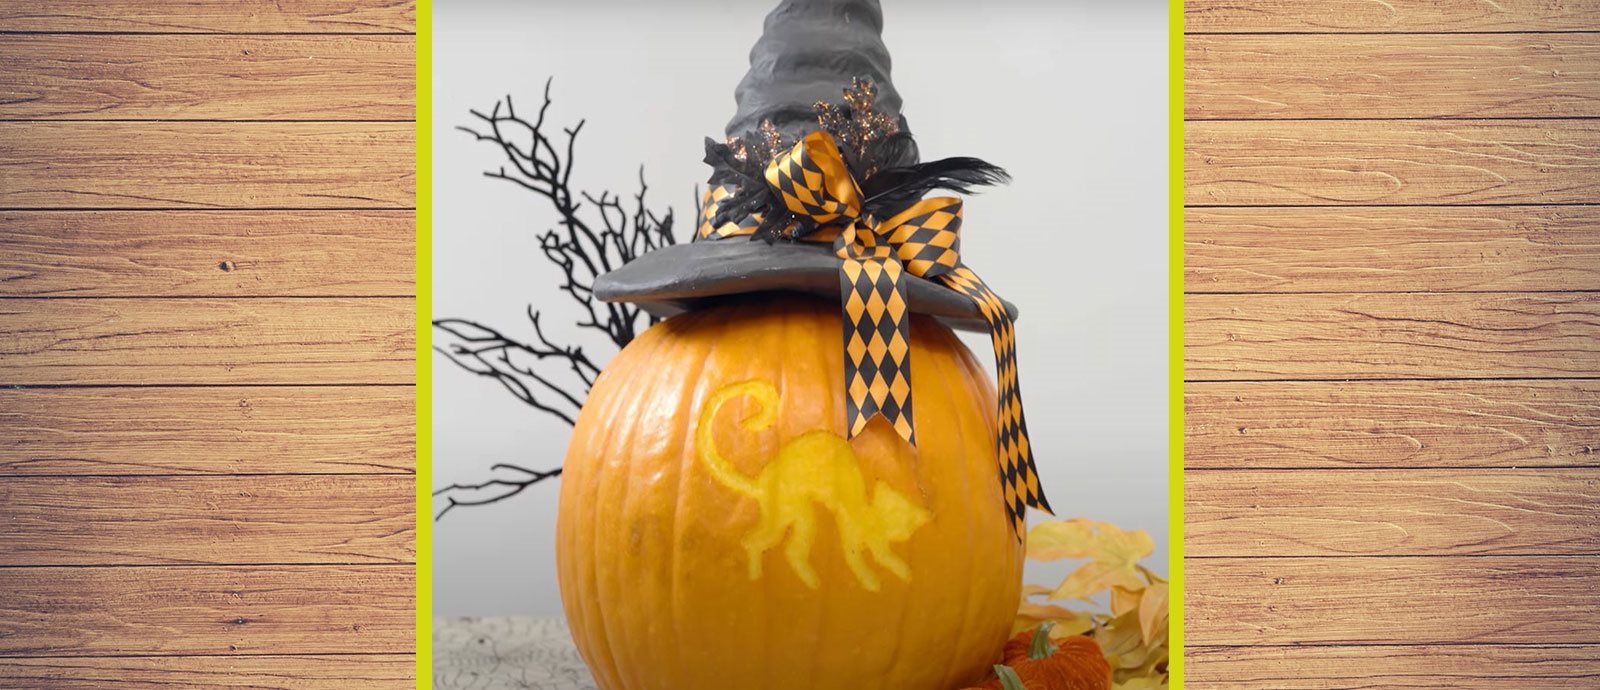 DIY HALLOWEEN PUMPKIN CARVING WITH A ROTARY TOOL